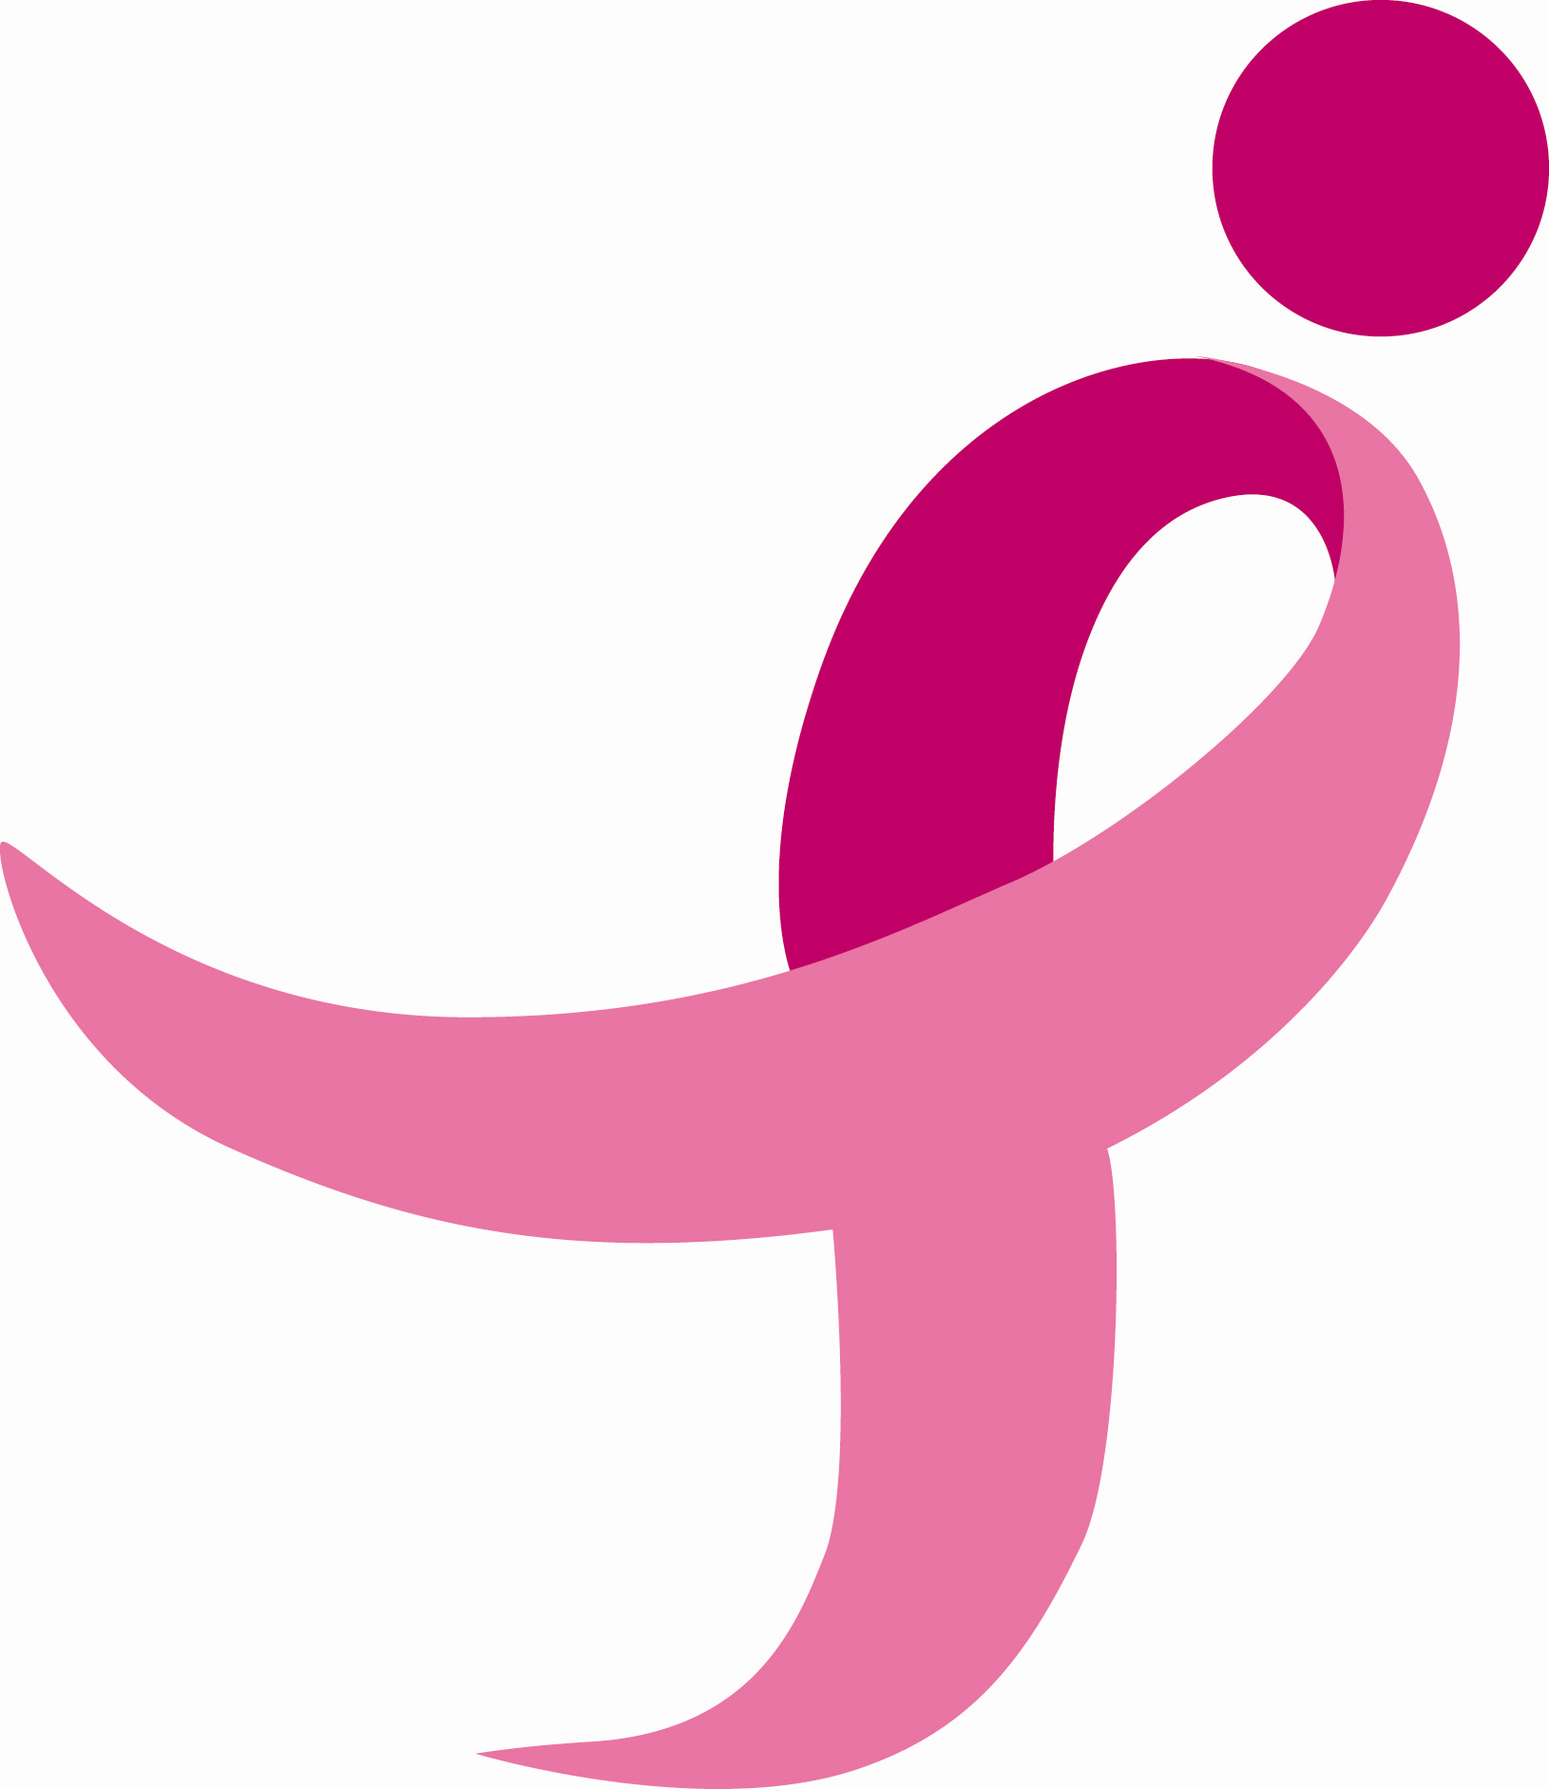 Breast Cancer Ribbon Vector Free Clipart - Free to use Clip Art ...